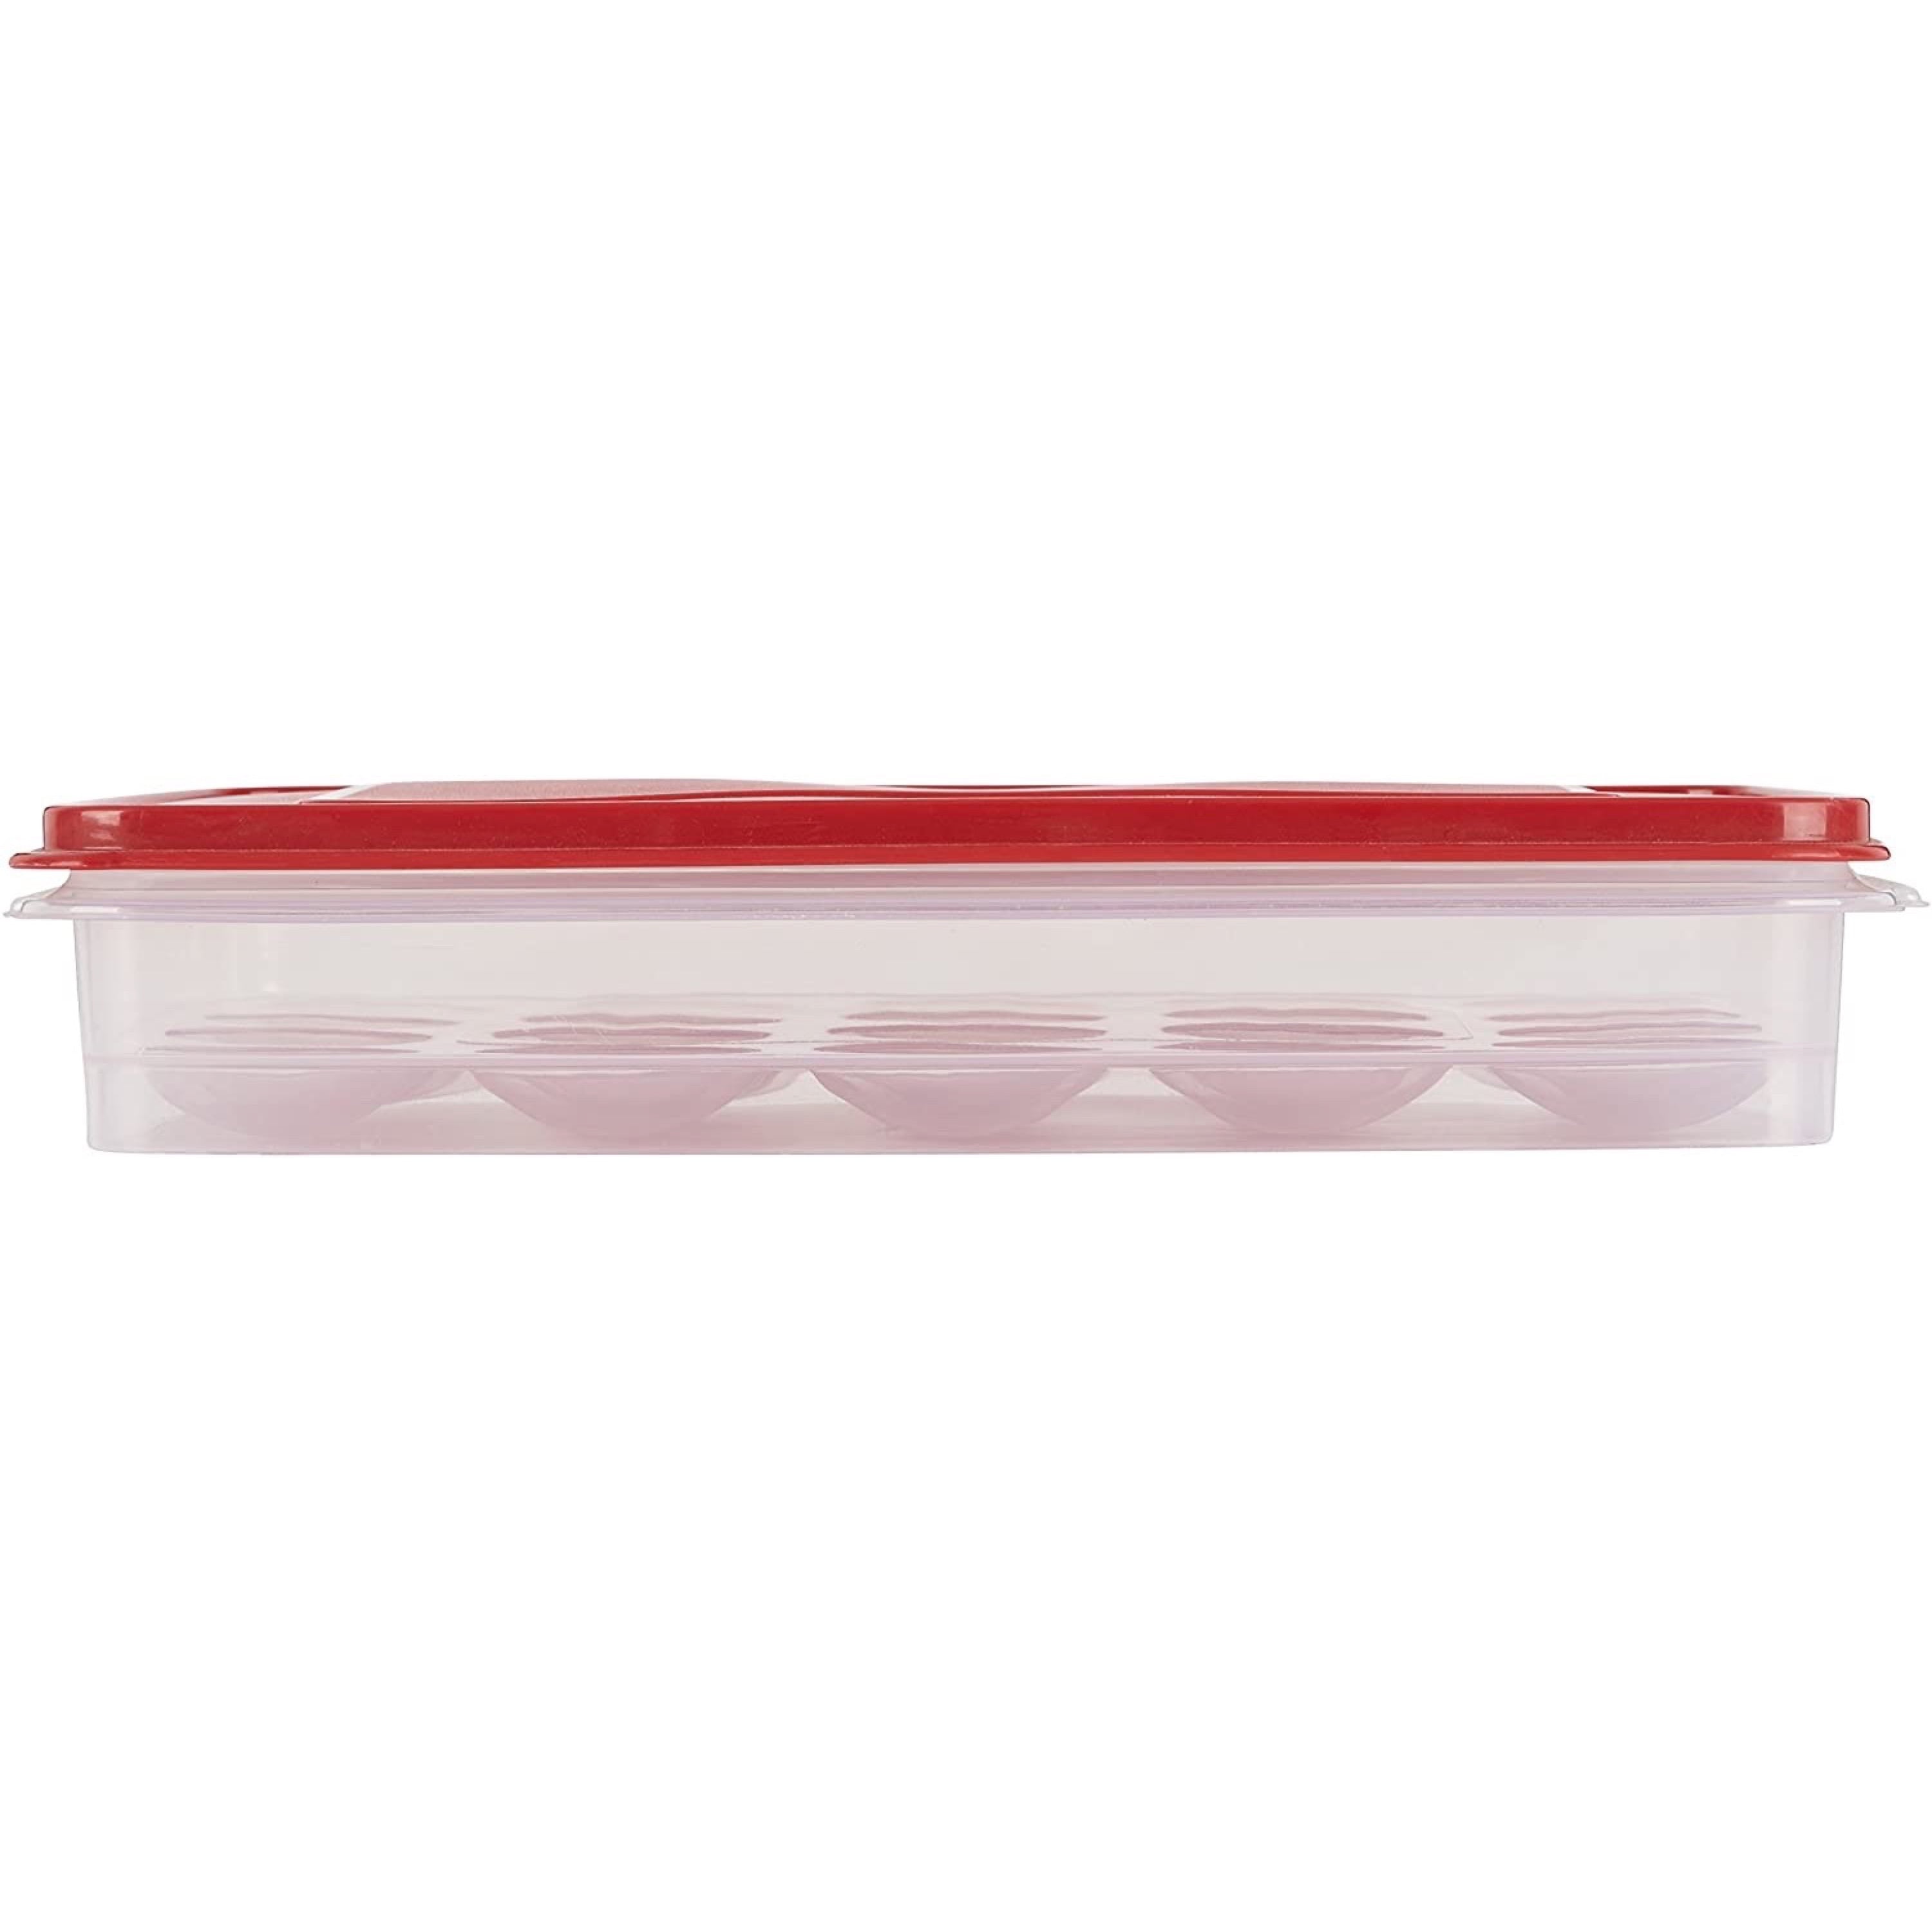 Rubbermaid Egg Food Storage Container, Red color